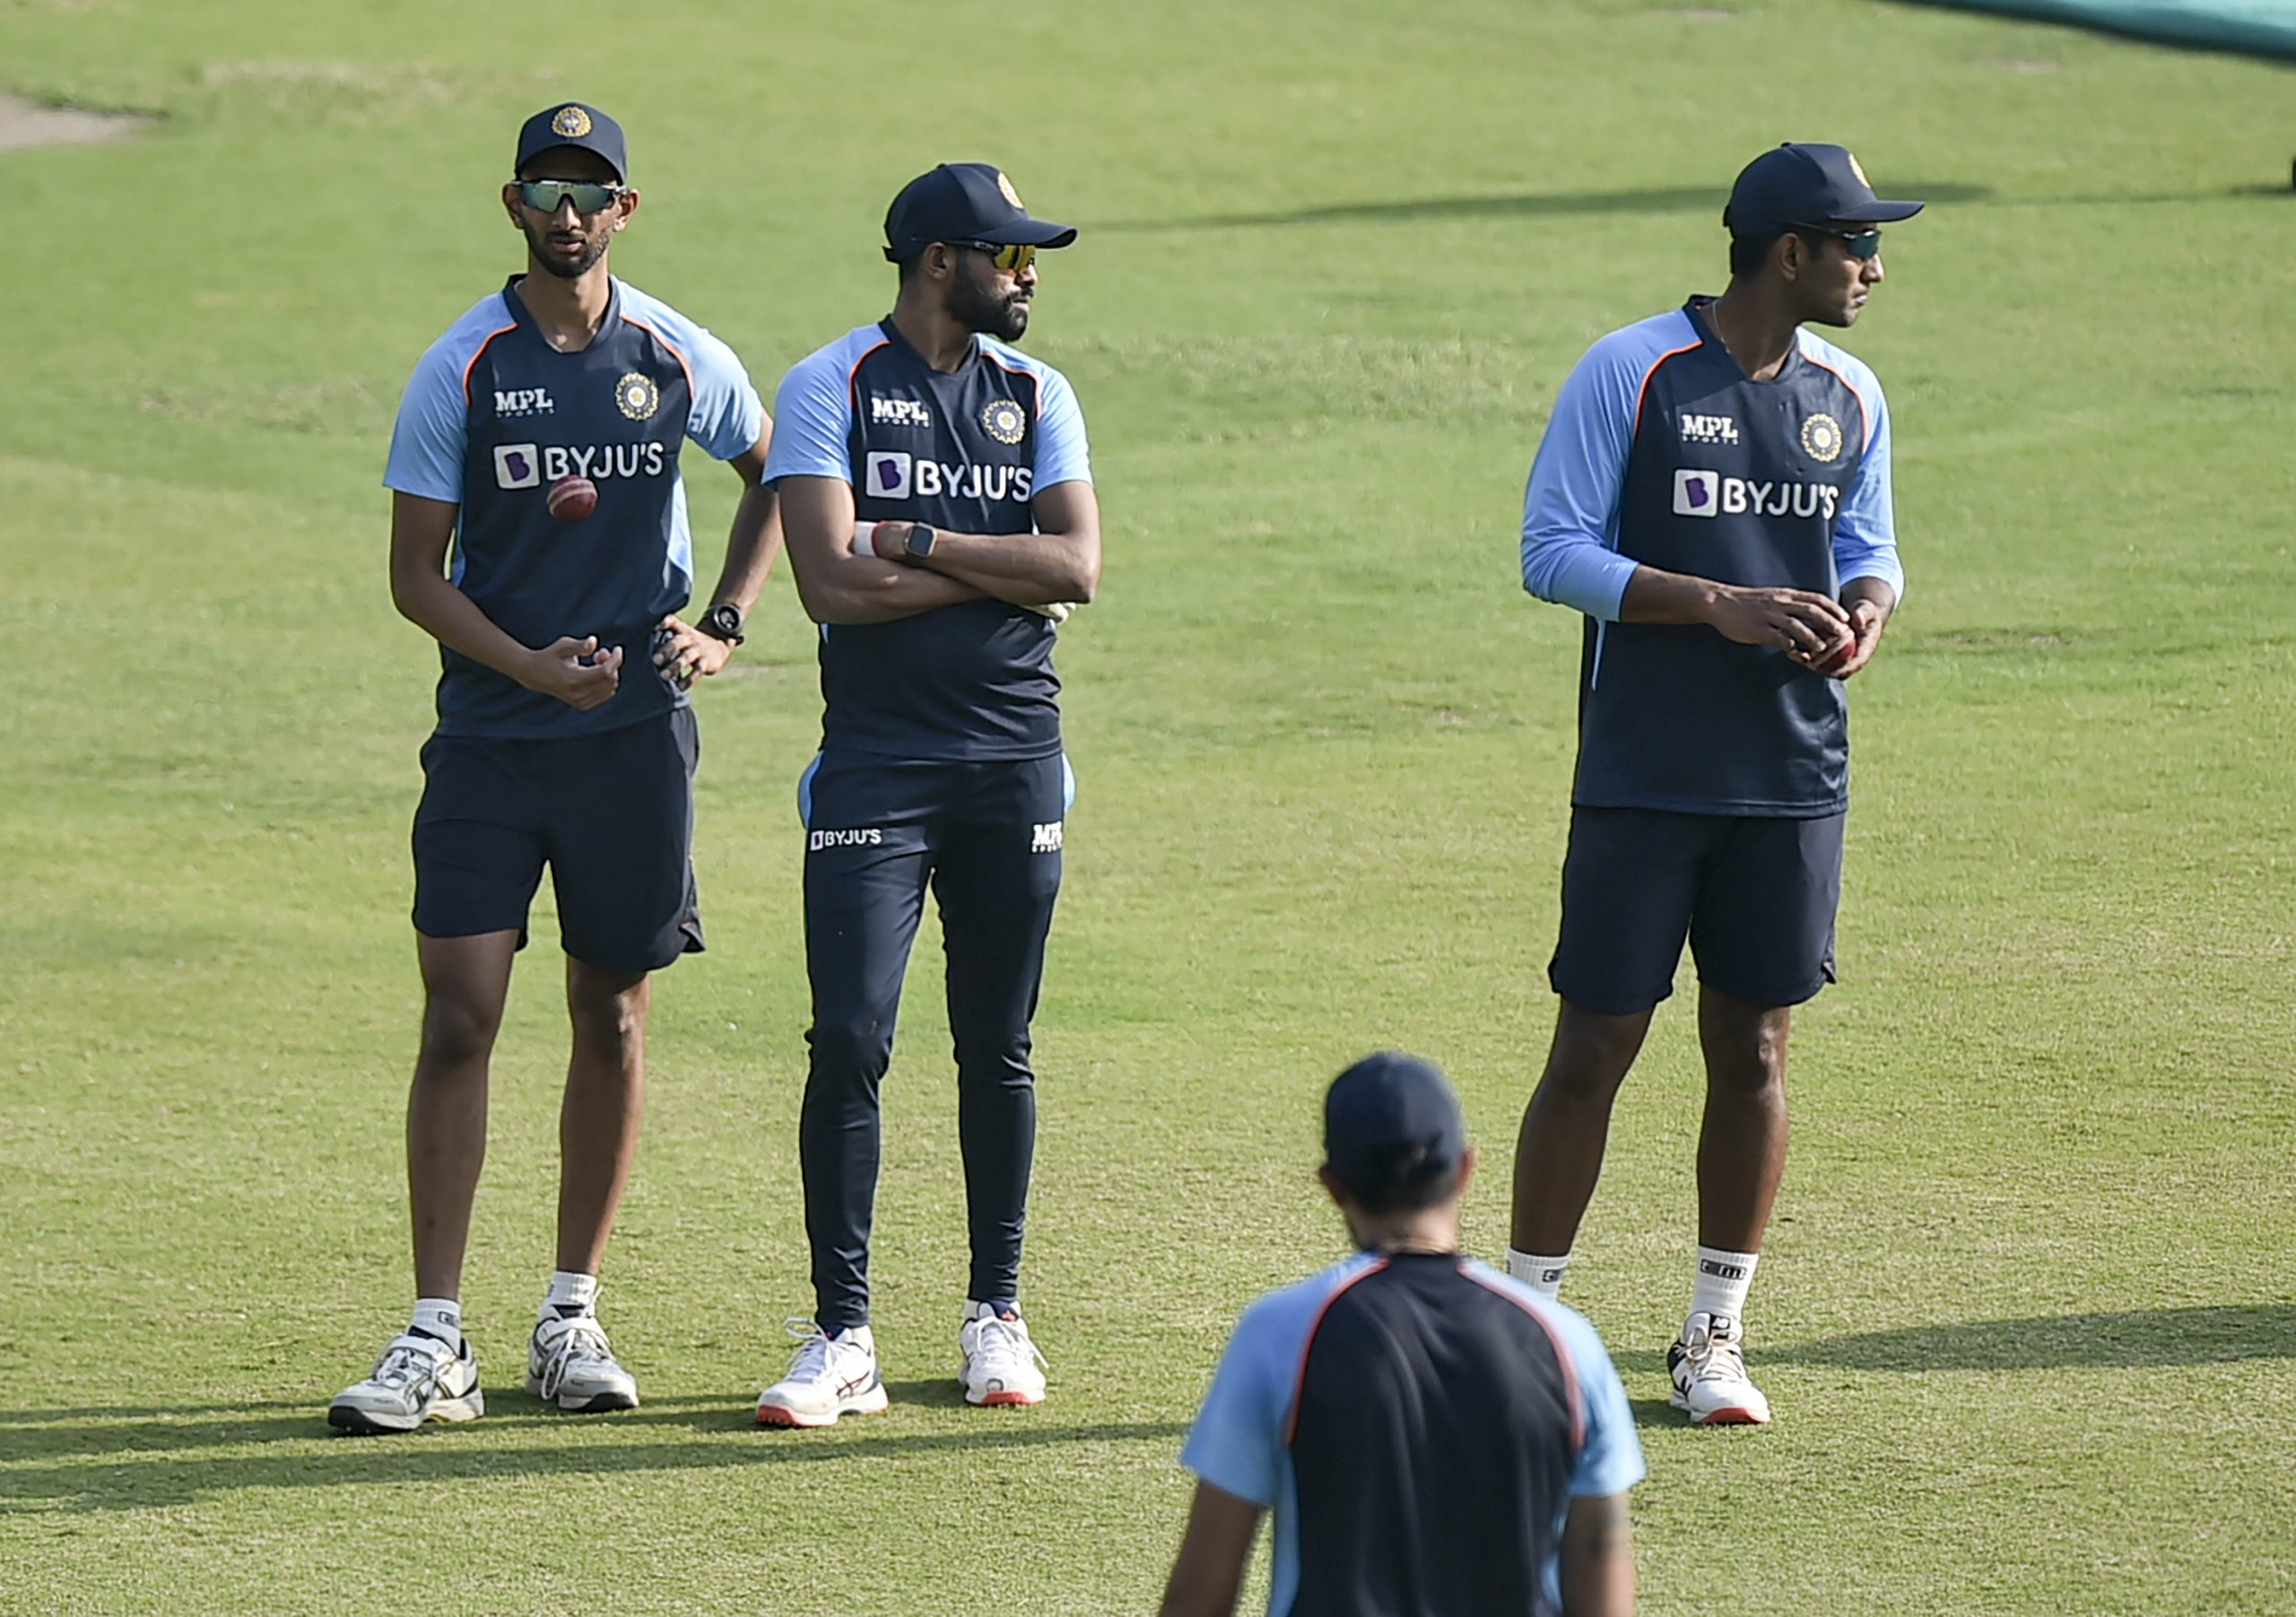 India vs New Zealand: Players to watch out for in Test series